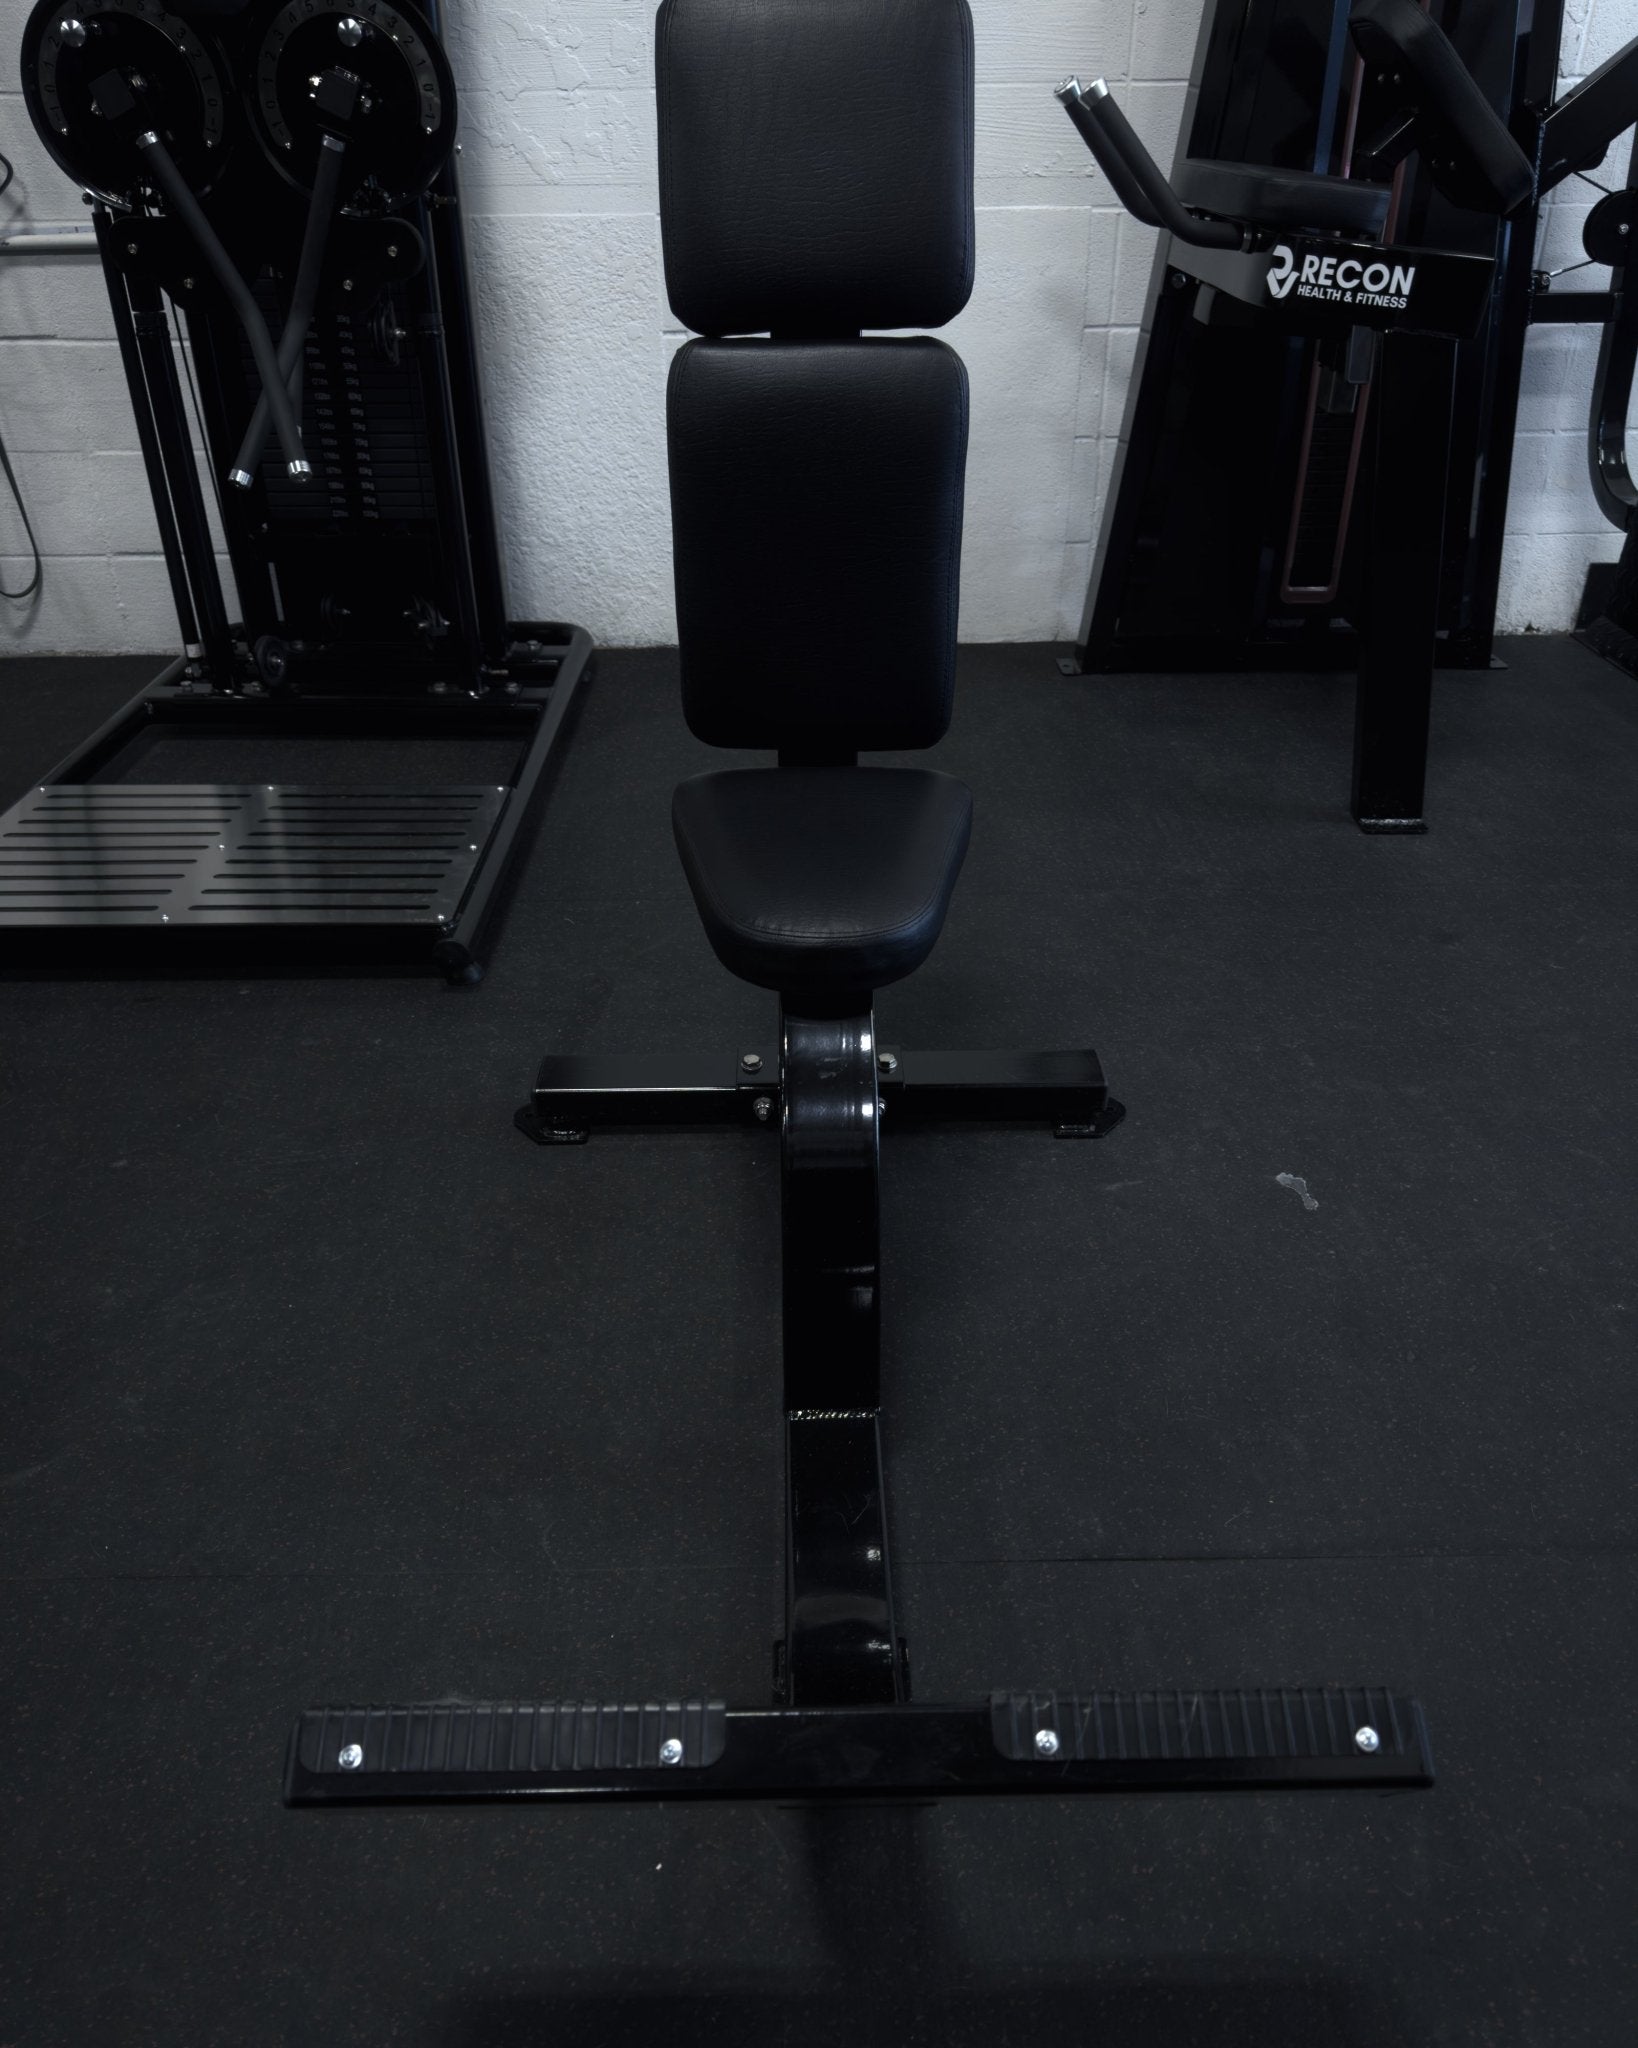 75 Degree Utility Bench - Recon Health & Fitness